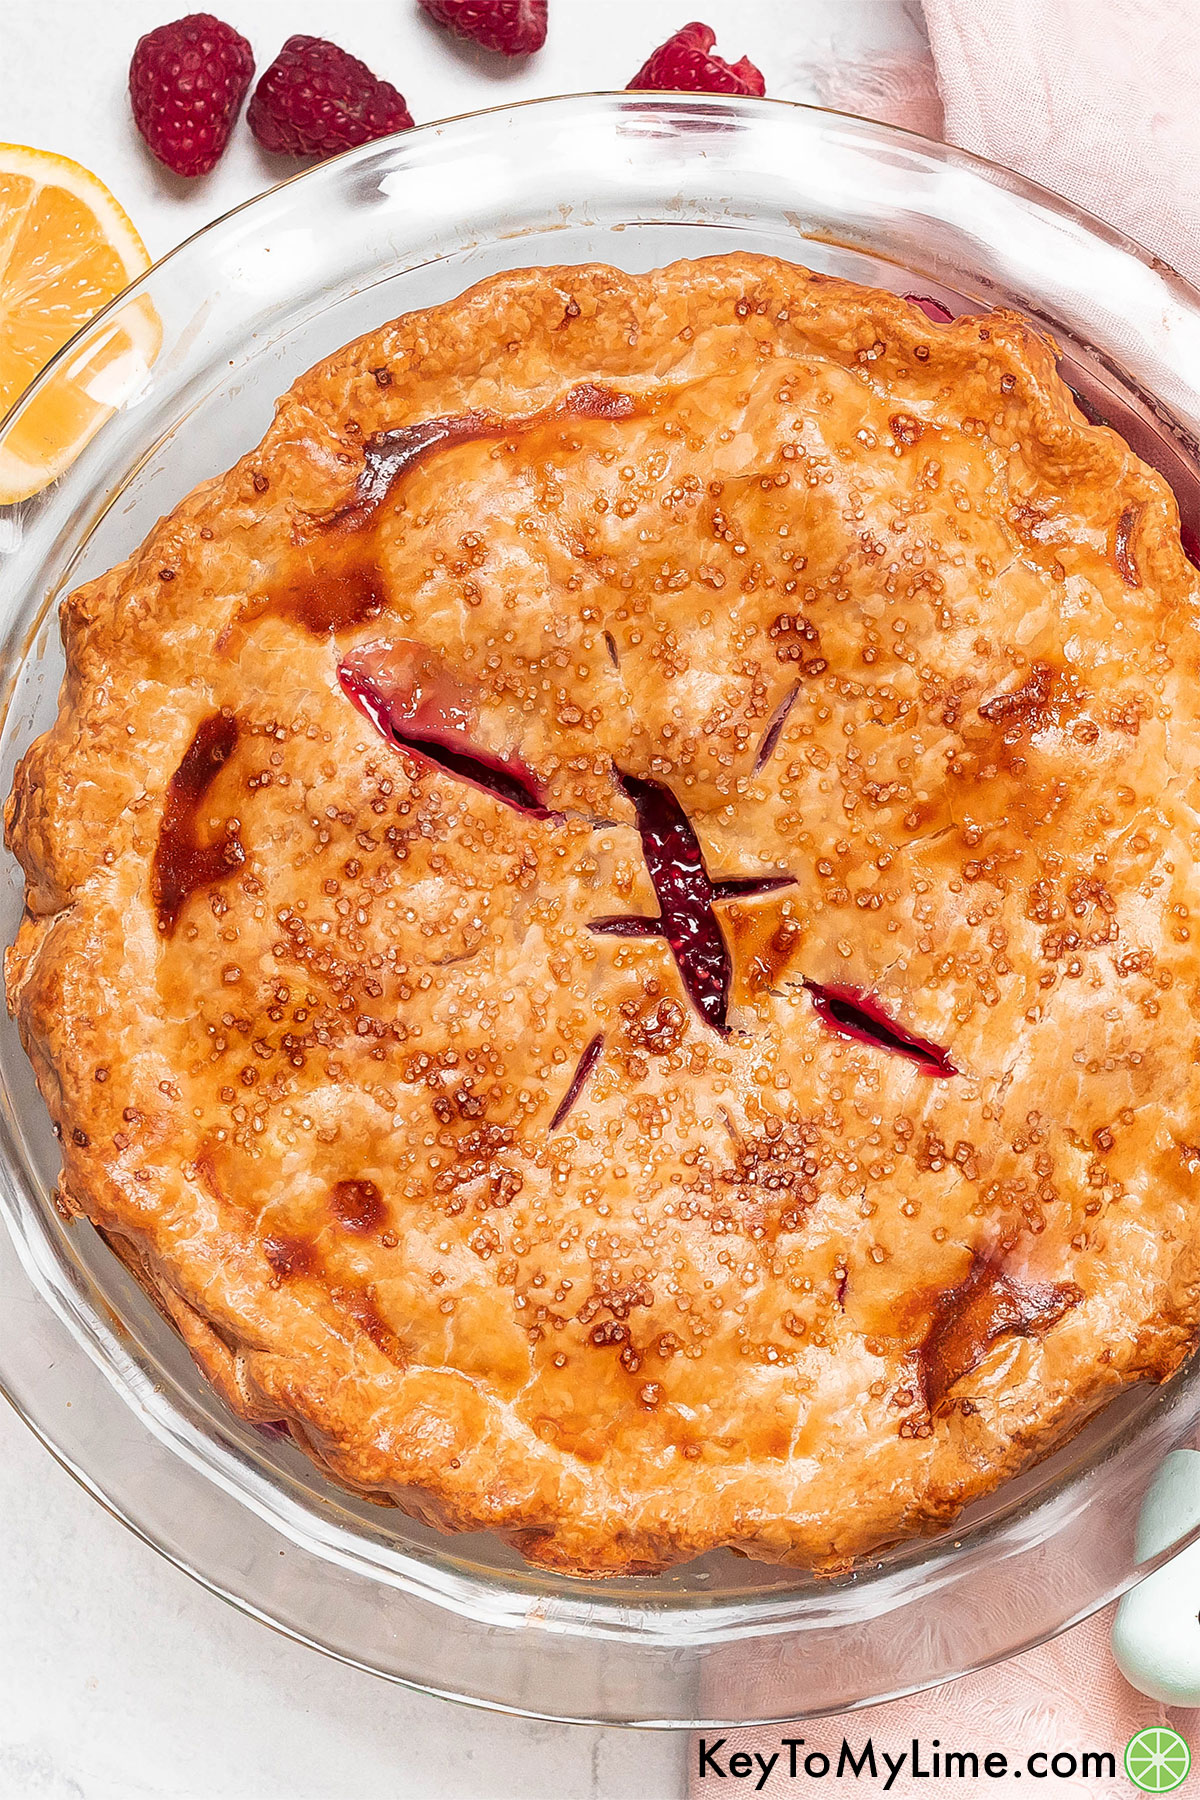 A golden brown pie with thick raspberry filling inside a pie dish.